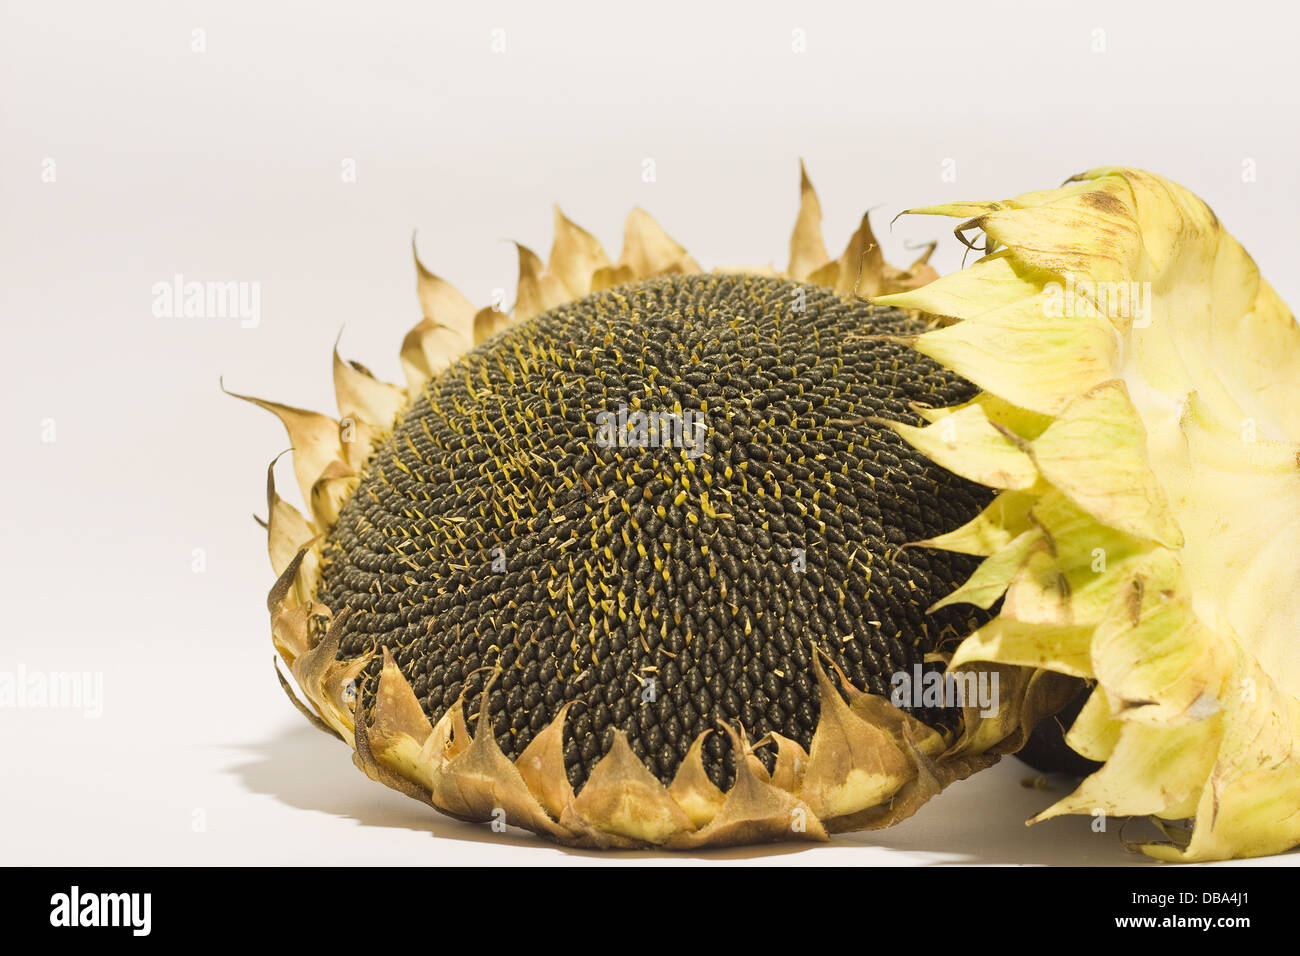 Sunflowers and  inner seeds on white background ,Helianthus  Annuus,yellow,cut out,studio,style life,two,close up,natural. Stock Photo